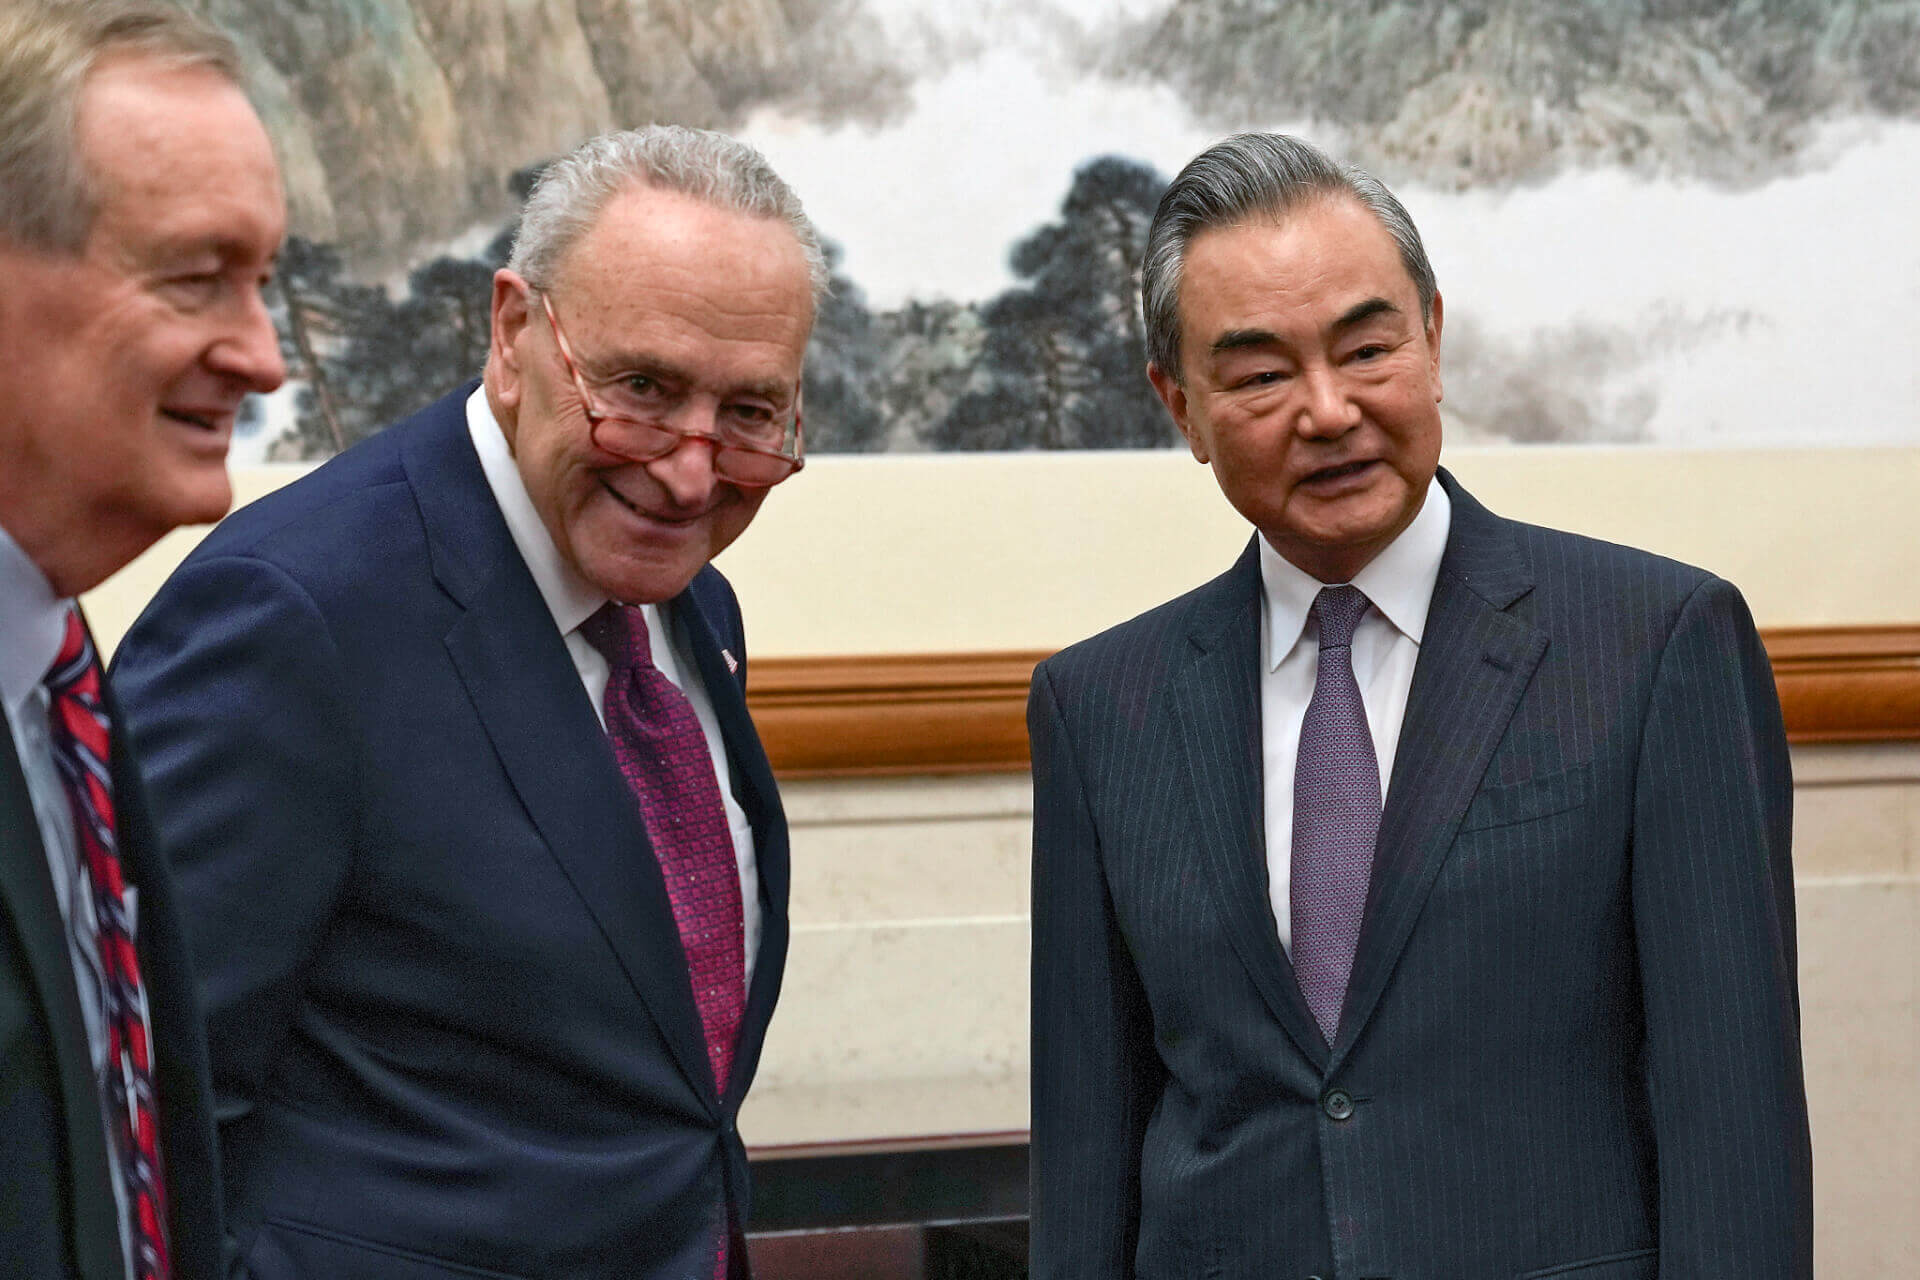 “Very Disappointed” with China’s Statement on Israel-Palestine Violence: US Senate Majority Leader Chuck Schumer